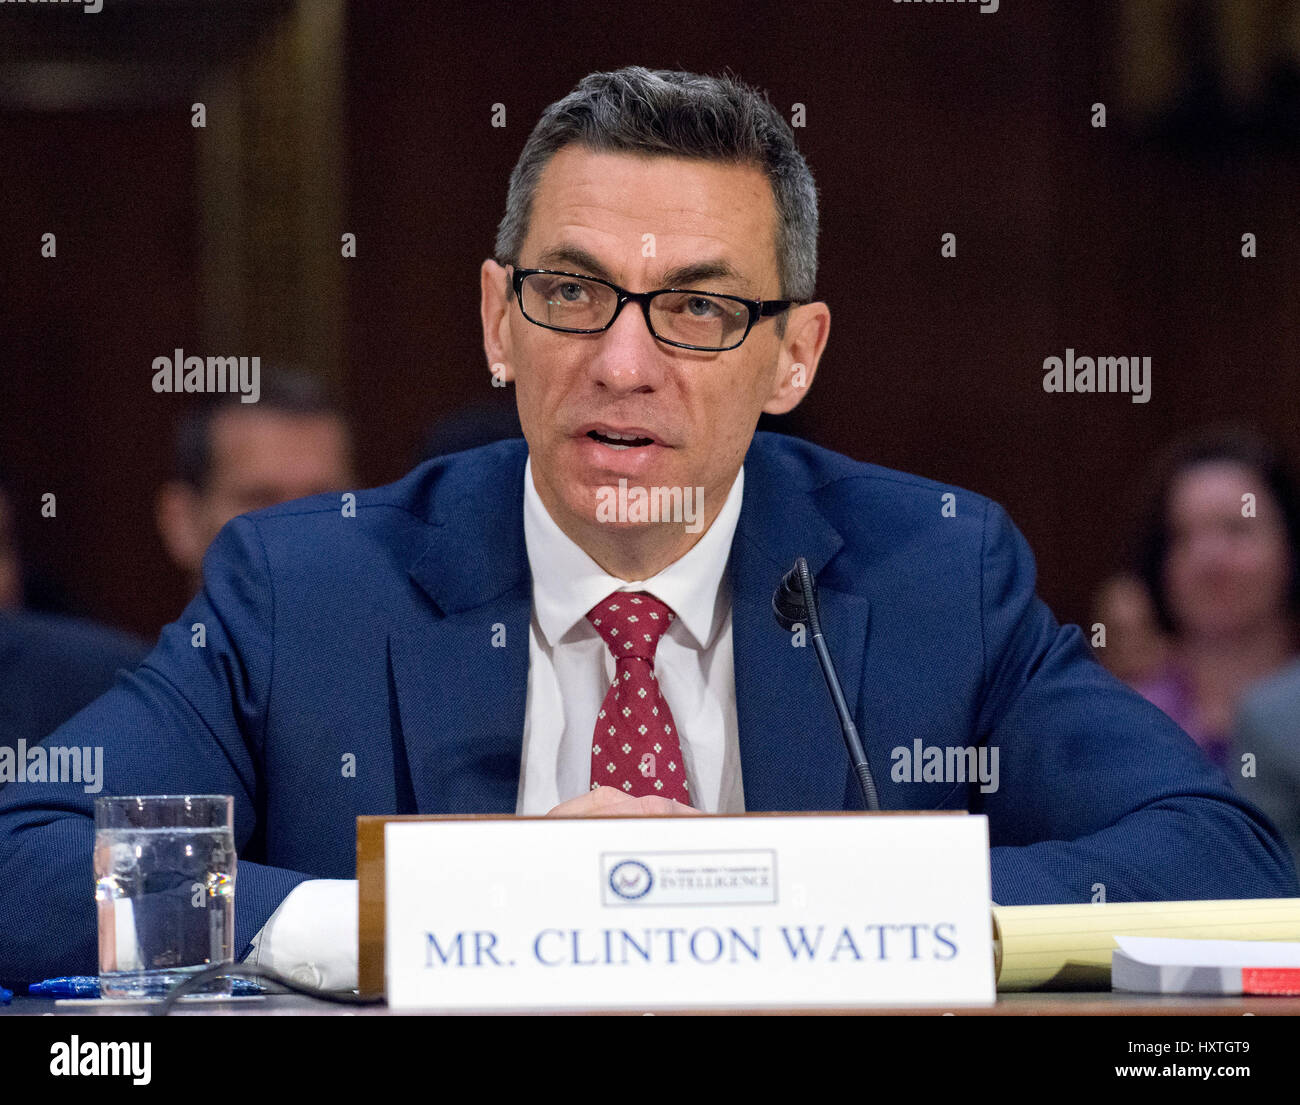 Washington DC, USA. 30th March 2017. Clinton Watts, Senior Fellow, Foreign Policy Research Institute Program on National Security testifies before the United States Senate Select Committee on Intelligence as it conducts an open hearing titled 'Disinformation: A Primer in Russian Active Measures and Influence Campaigns' on Capitol Hill in Washington, DC on Thursday, March 30, 2017. Credit: Ron Sachs/CNP /MediaPunch/Alamy Live News Stock Photo